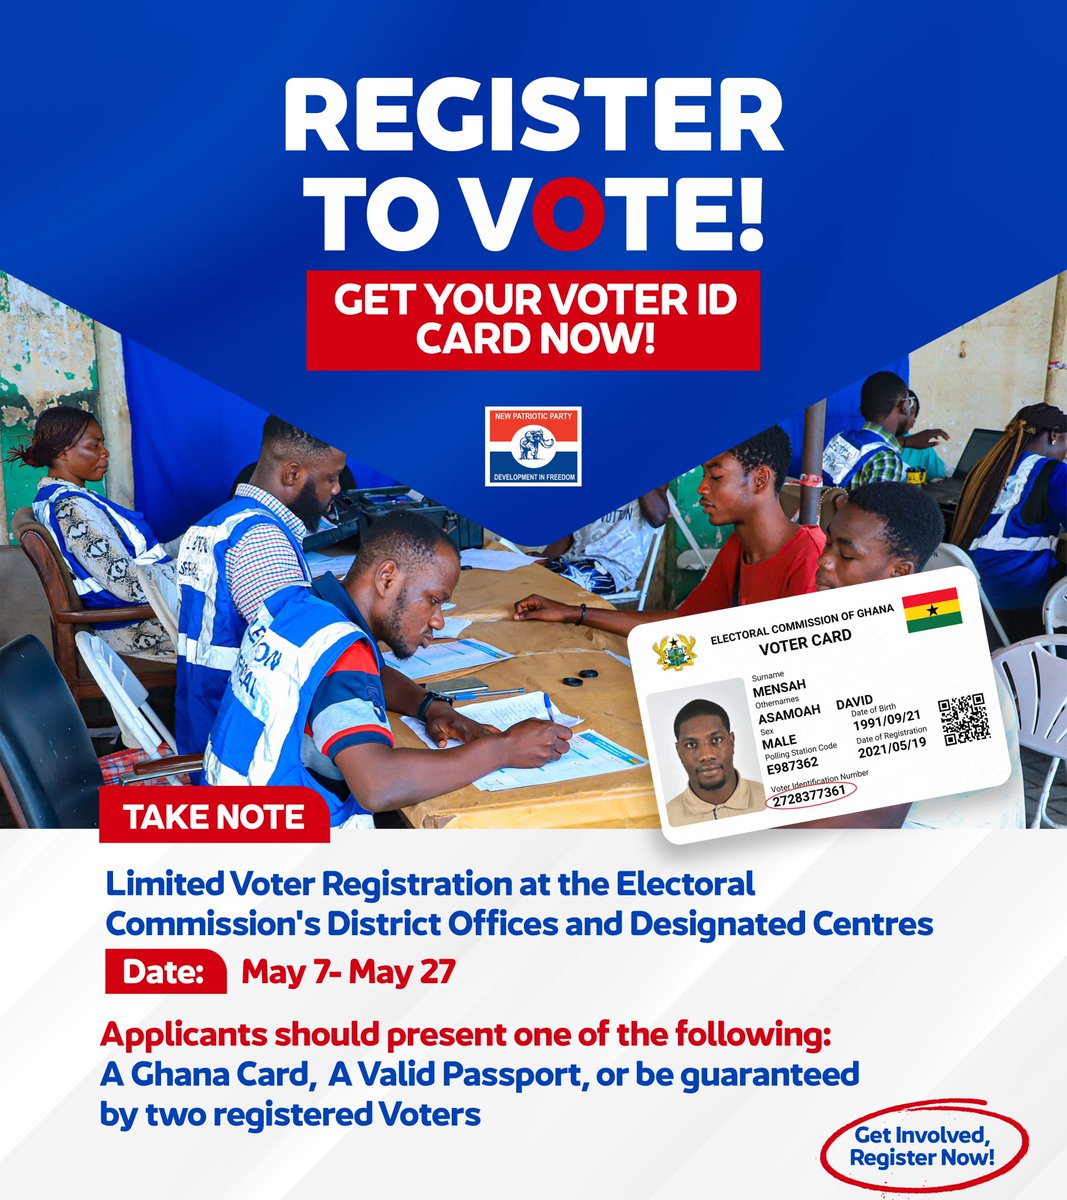 Make your vote count in December. Kindly register now and help better Ghana with bold solutions for our future. It is possible!